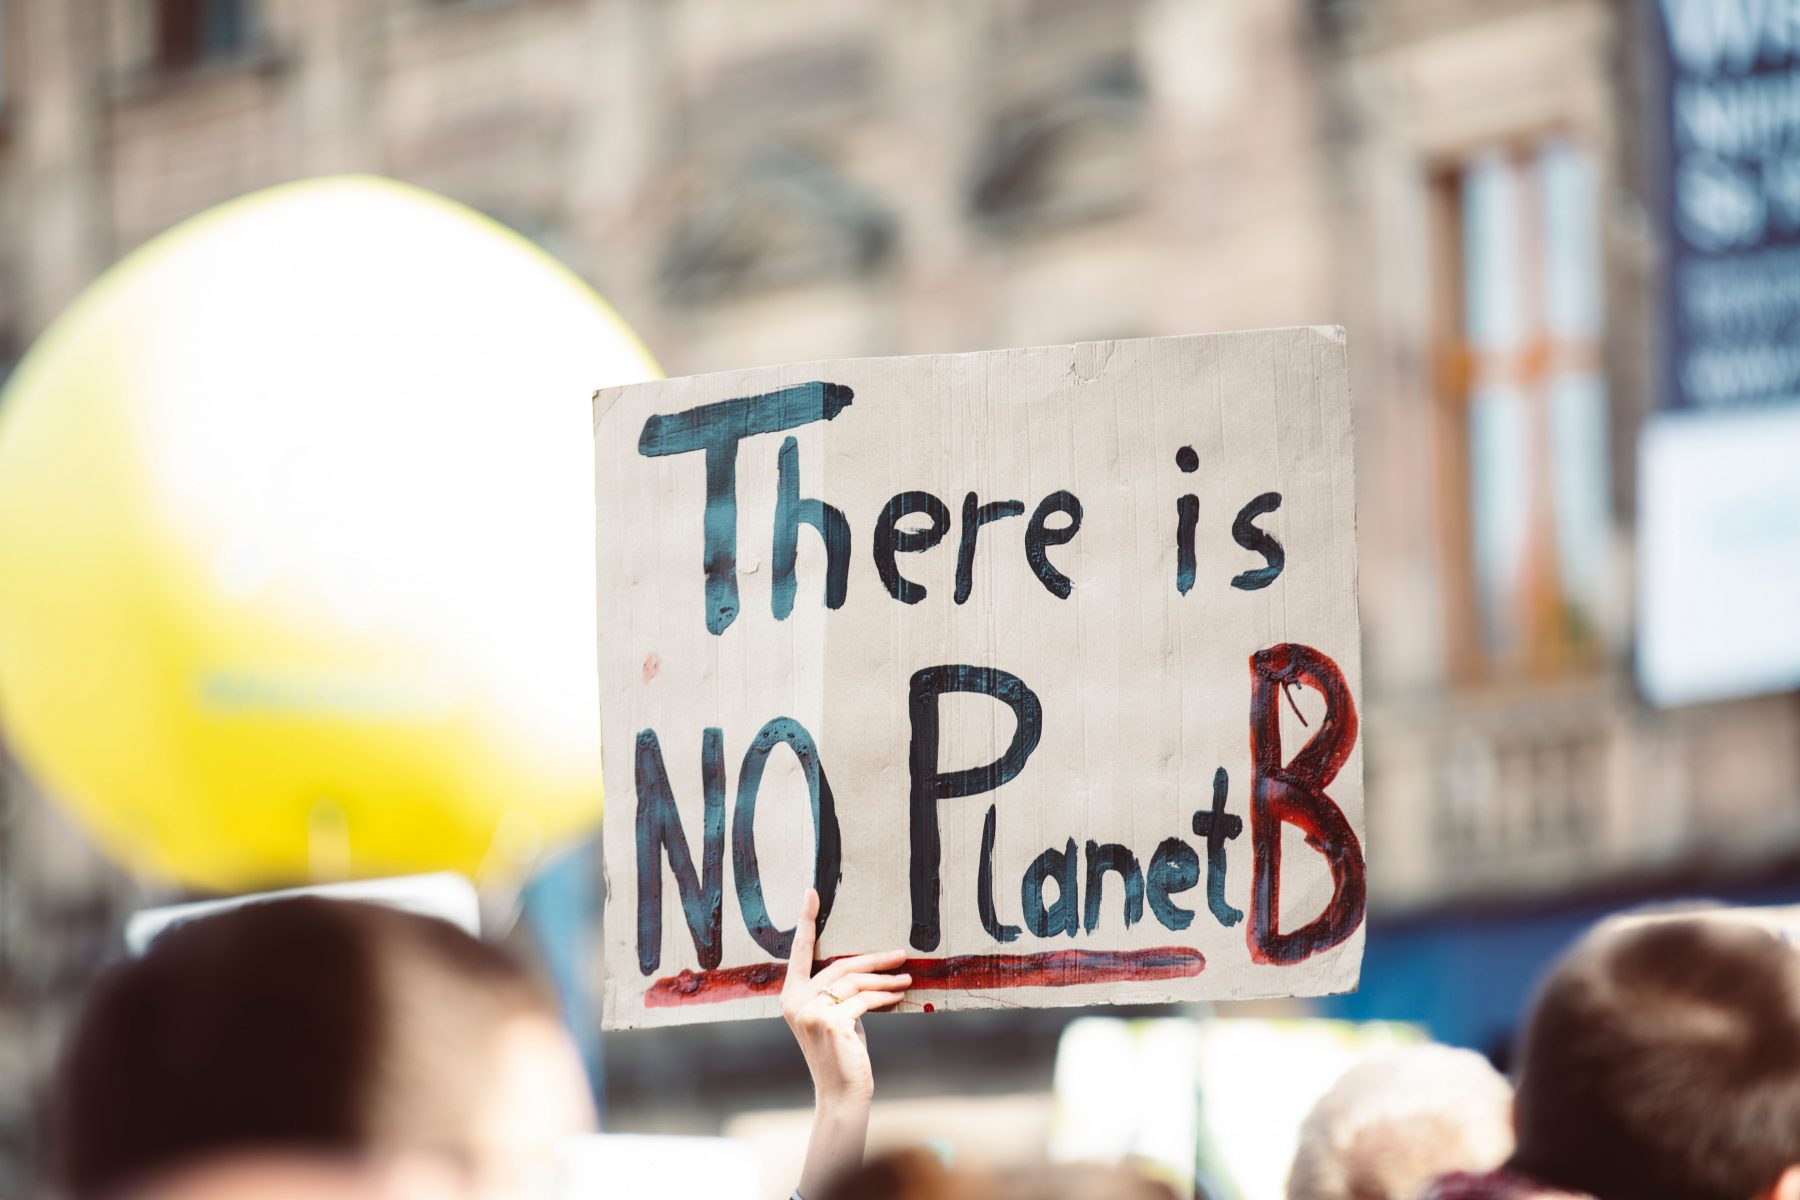 Image of a sign at a protest: there is no planet b